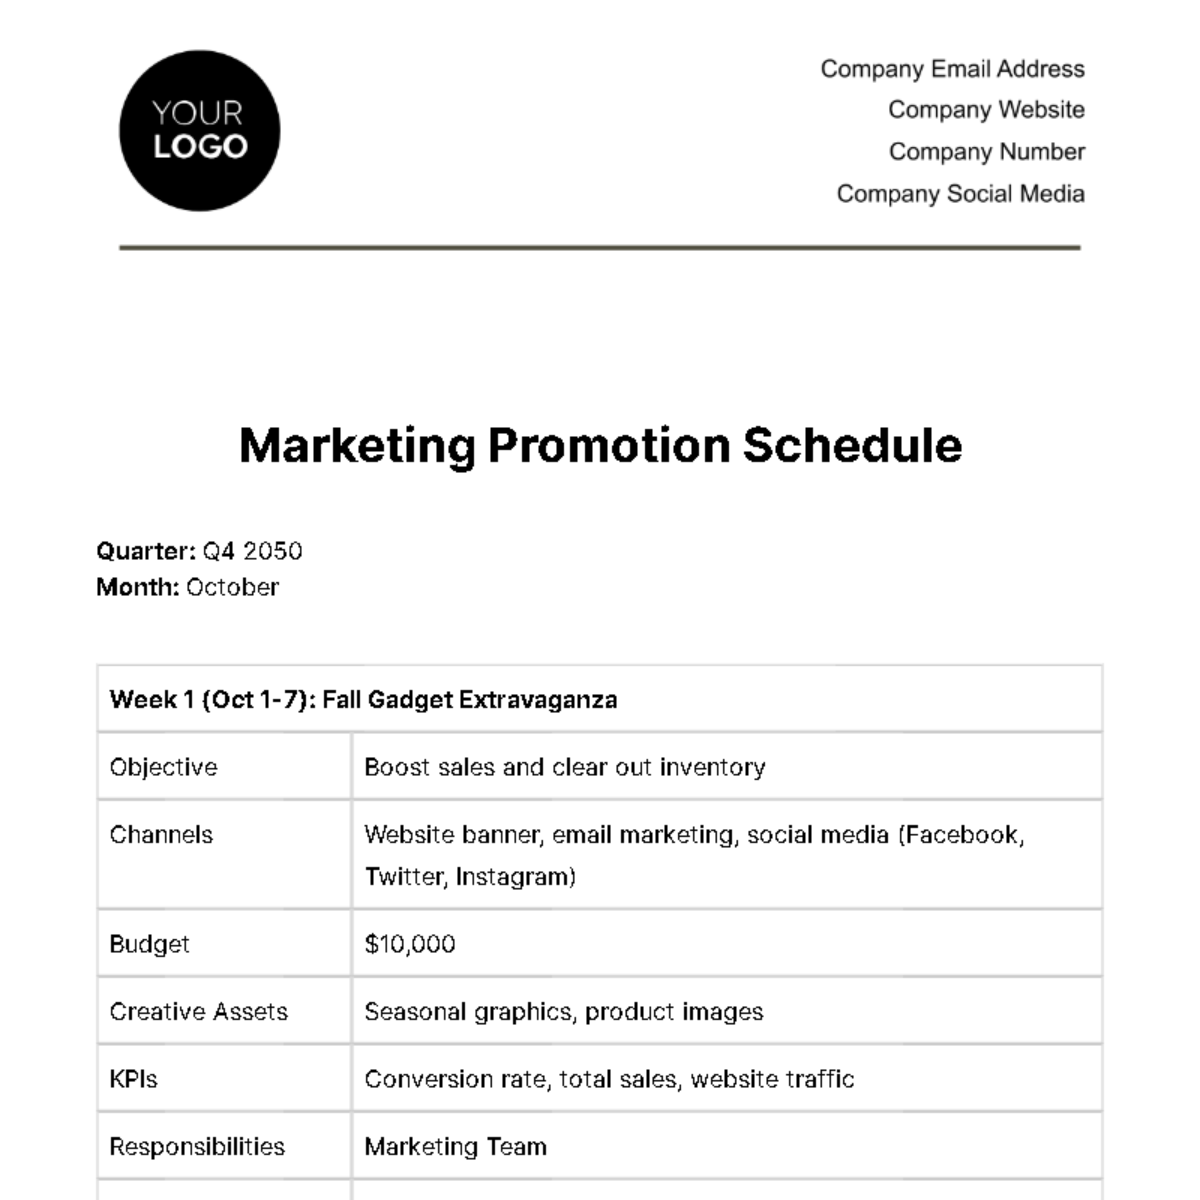 Free Marketing Promotion Schedule Template